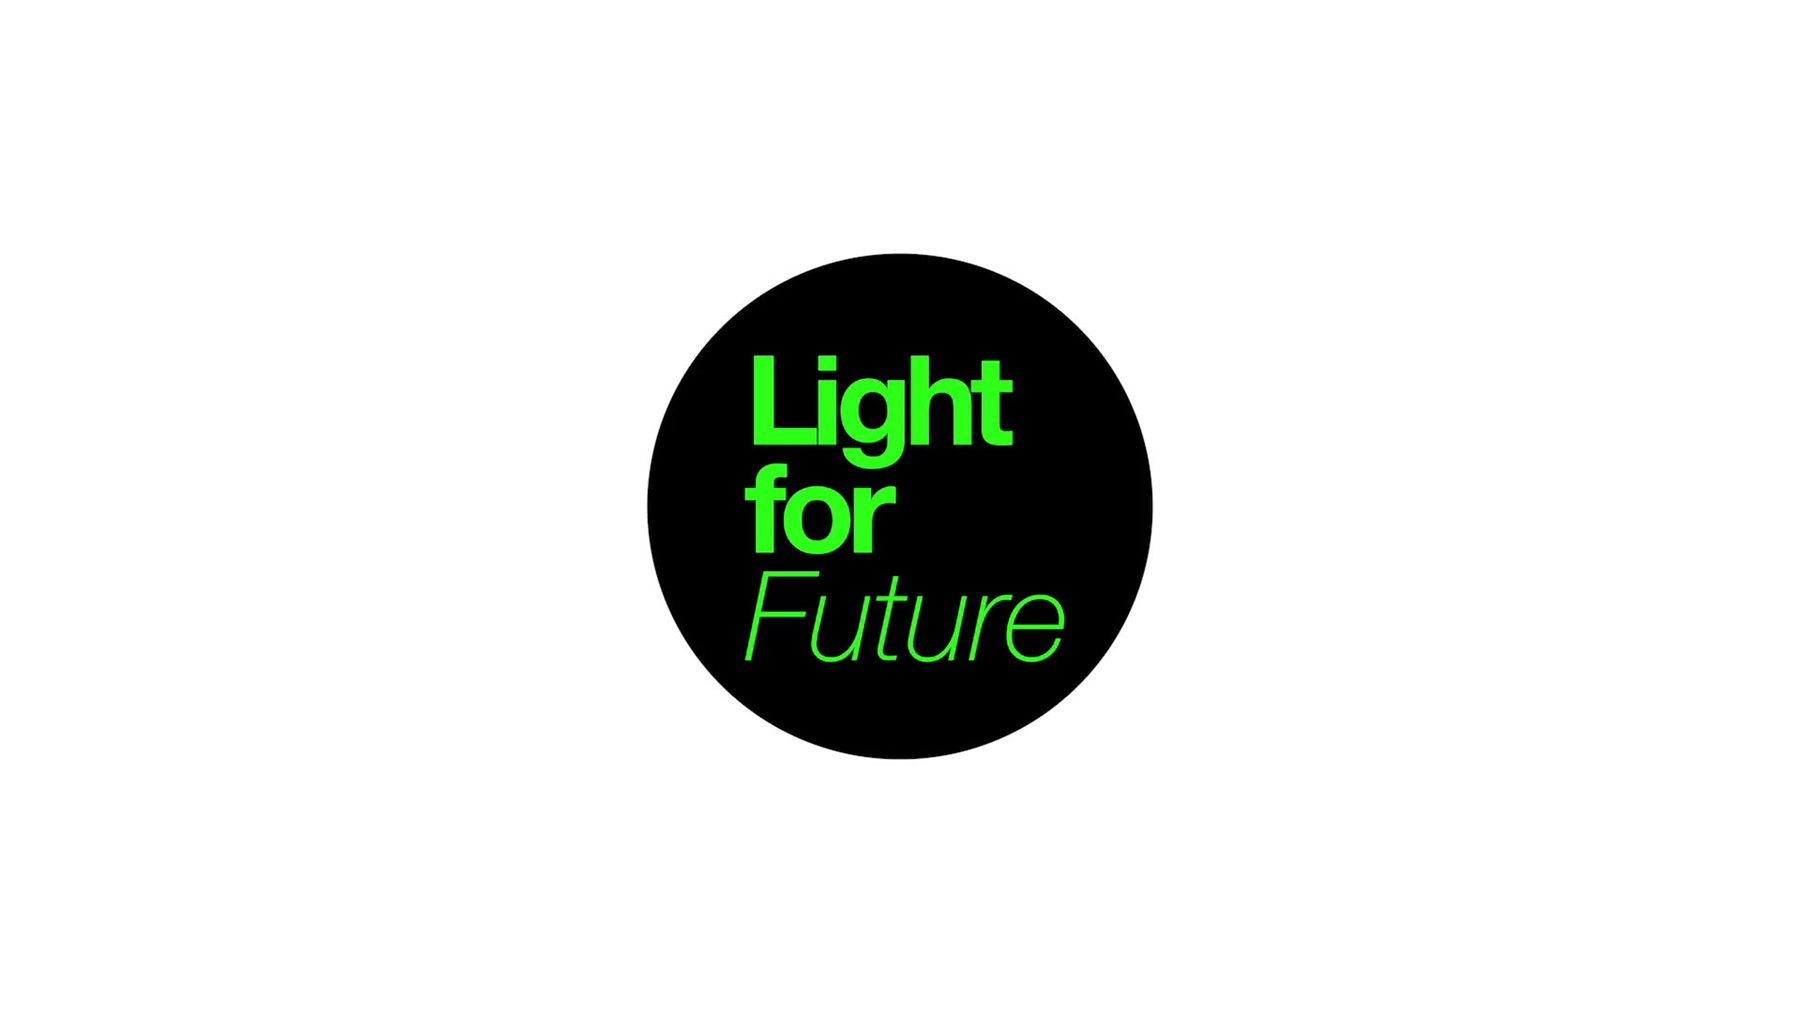 Are you a young lighting designer?